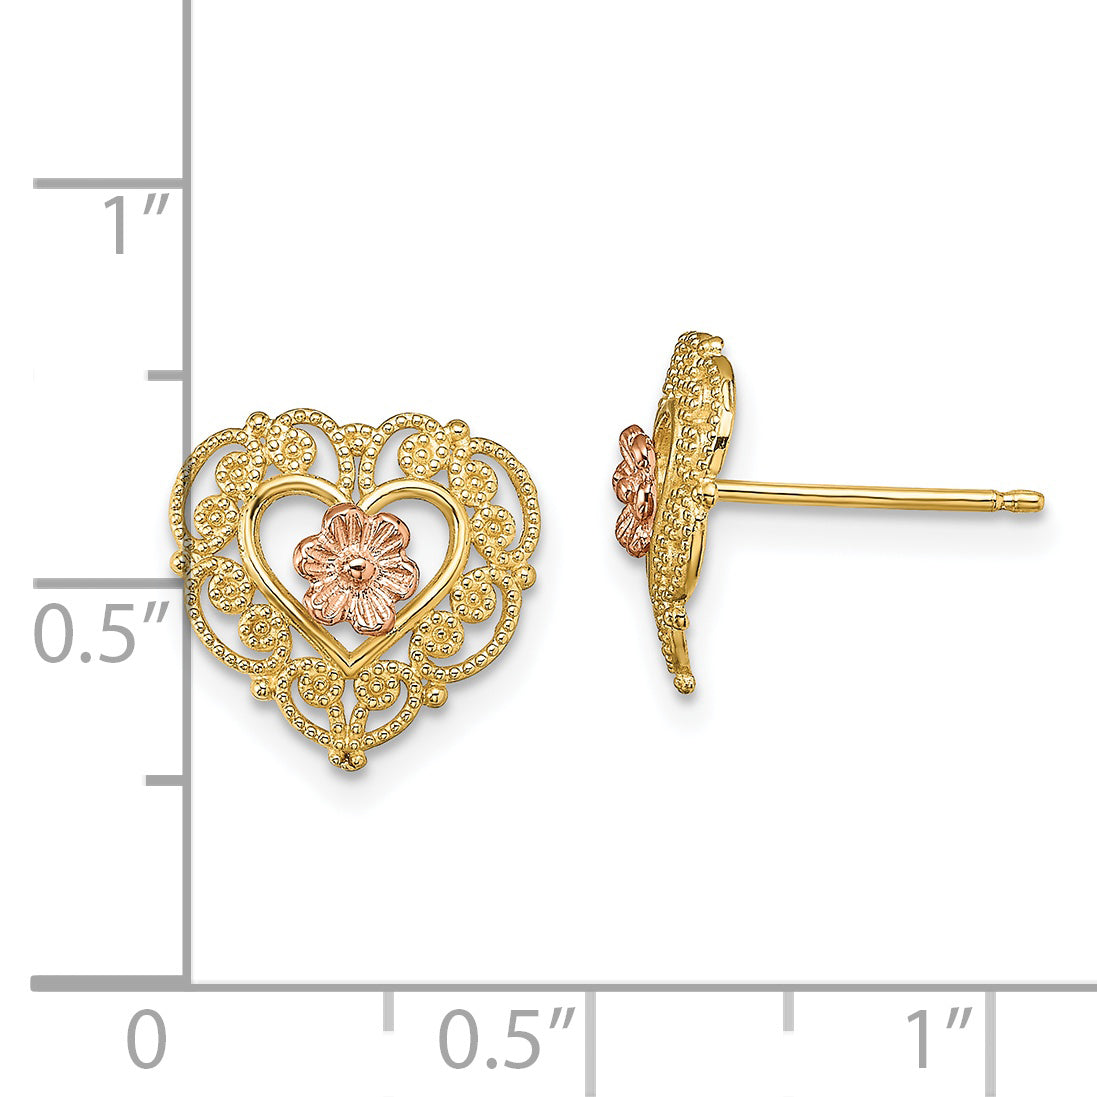 14k Two-Tone with Lace Trim and Flower Heart Post Earrings